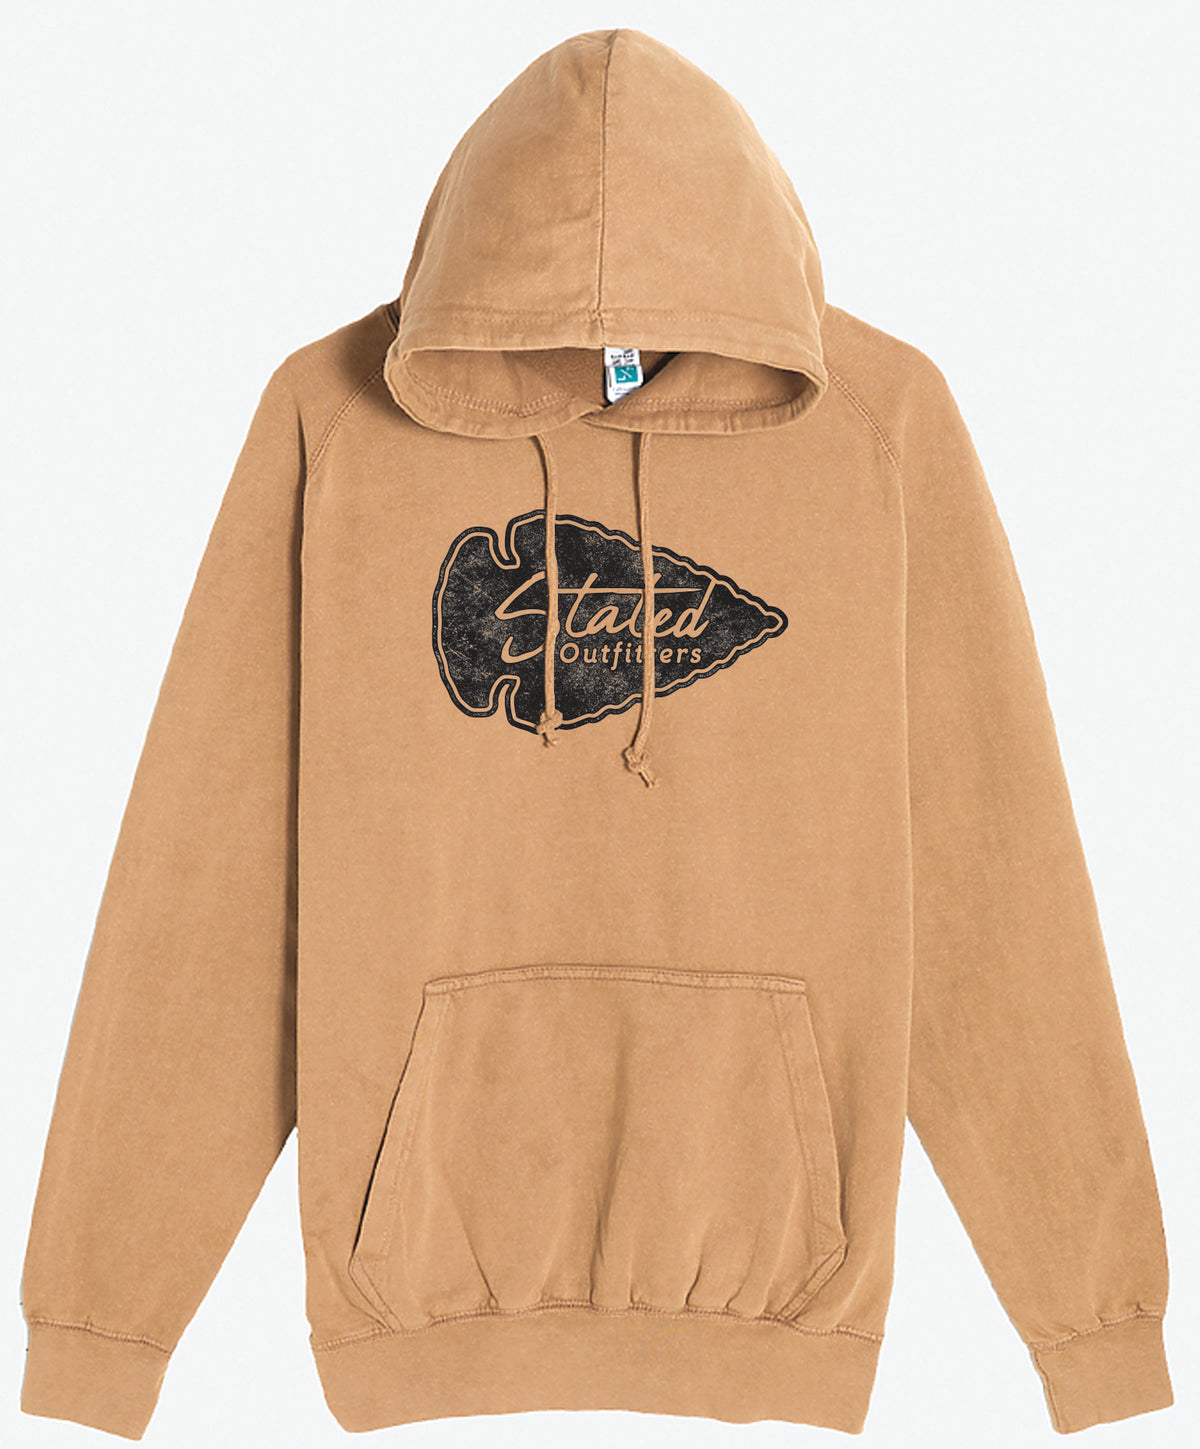 Stated Outfitters Arrowhead Hoodie